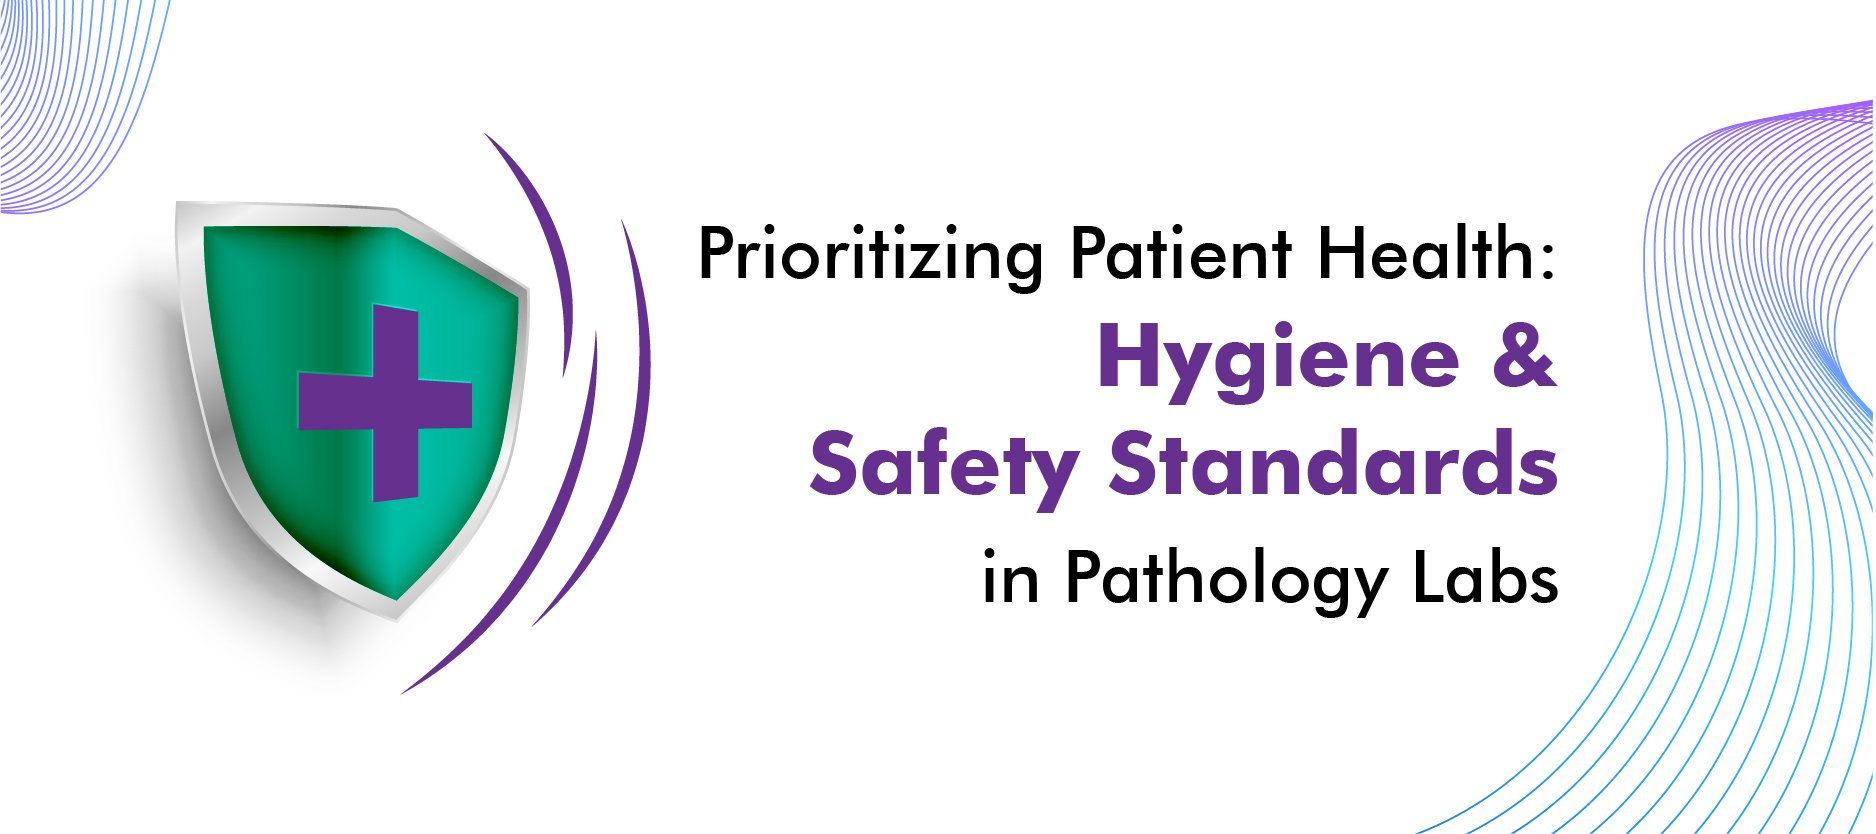 Pathology Labs – Upholding Hygiene & Safety Standards for Patient Well-being